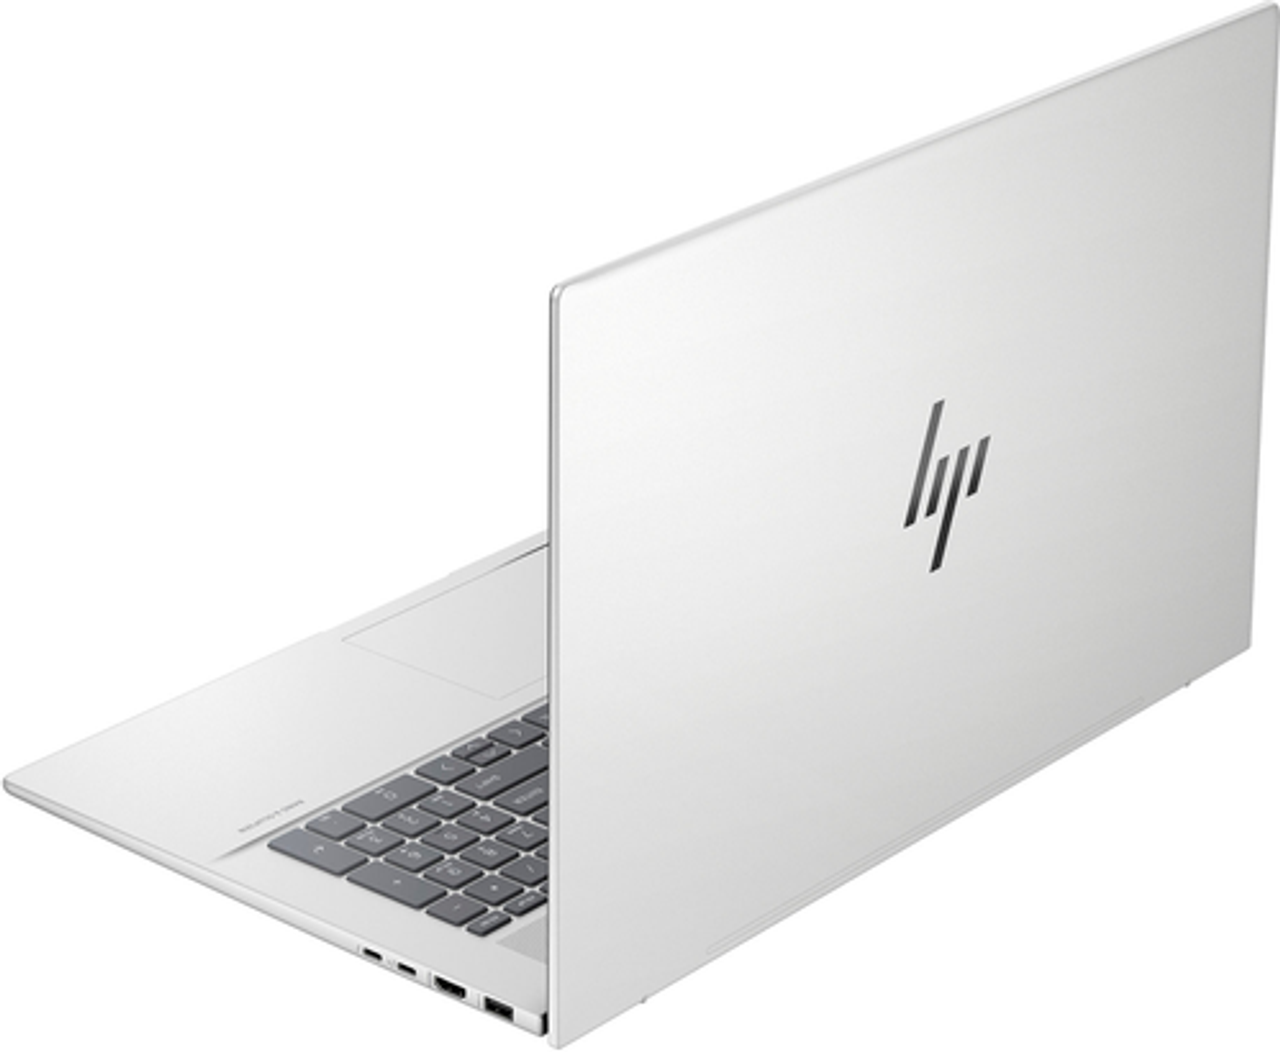 HP - ENVY 17.3" Full HD Touch-Screen Laptop - Intel Core i7 - 16GB Memory - 1TB SSD - Natural Silver